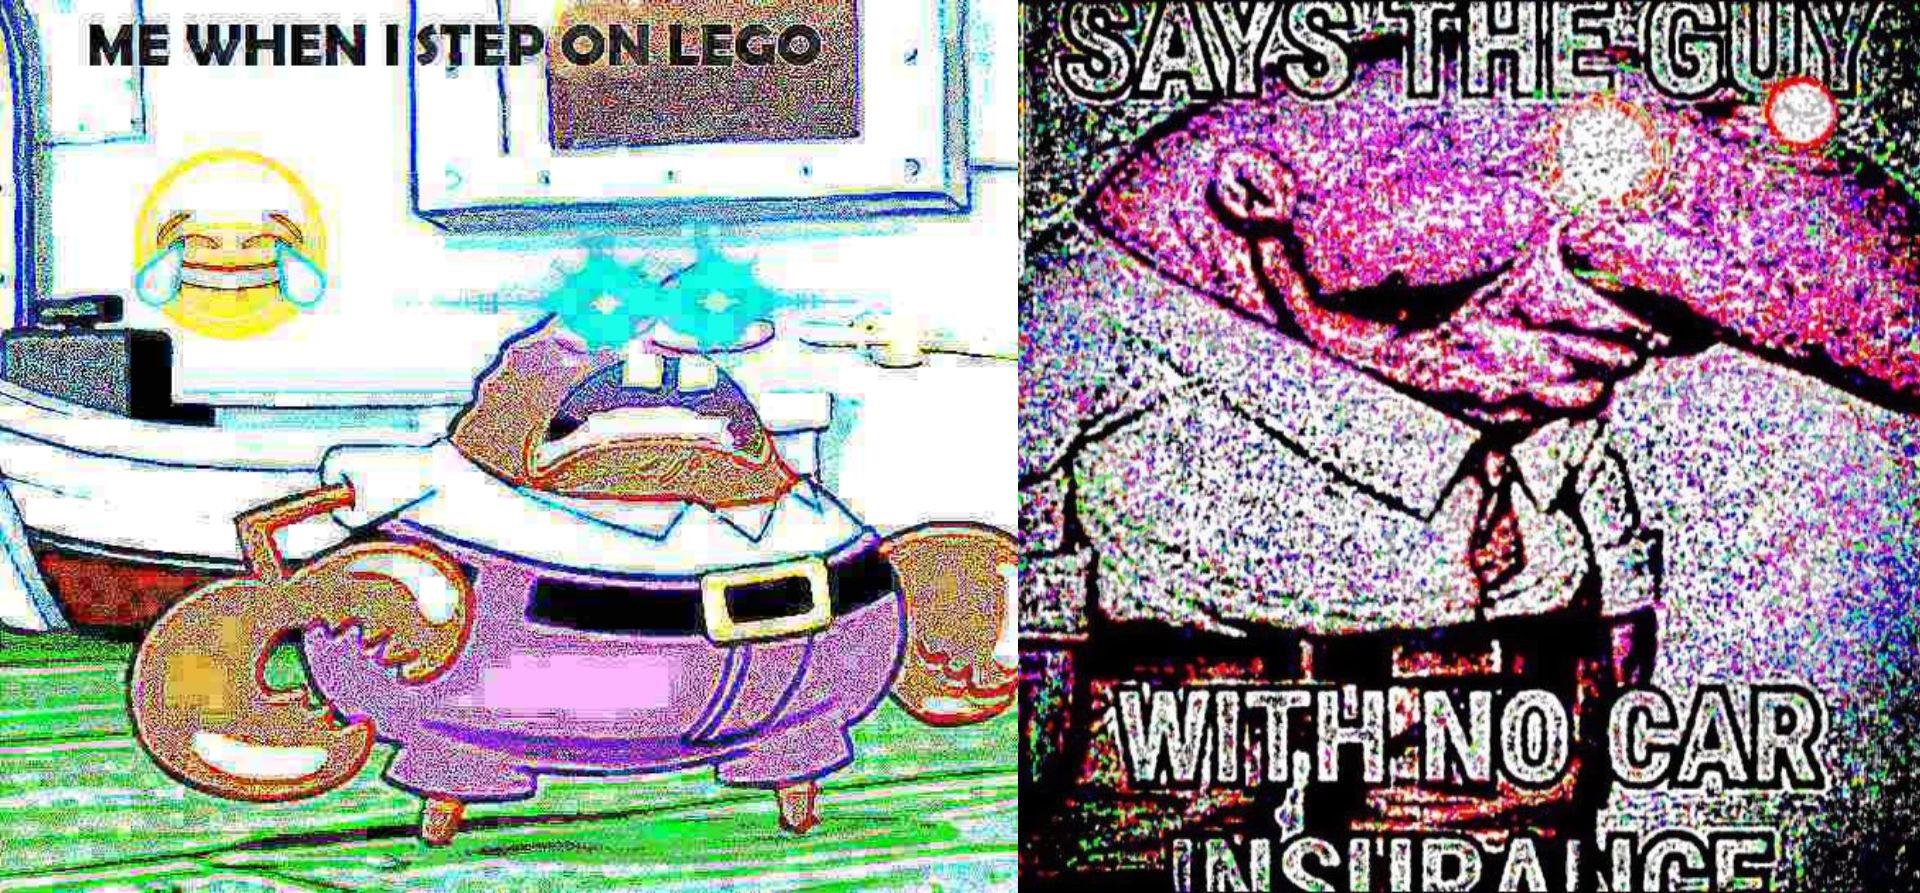 Frying memes: Are these memes really funnier when they're deep fried